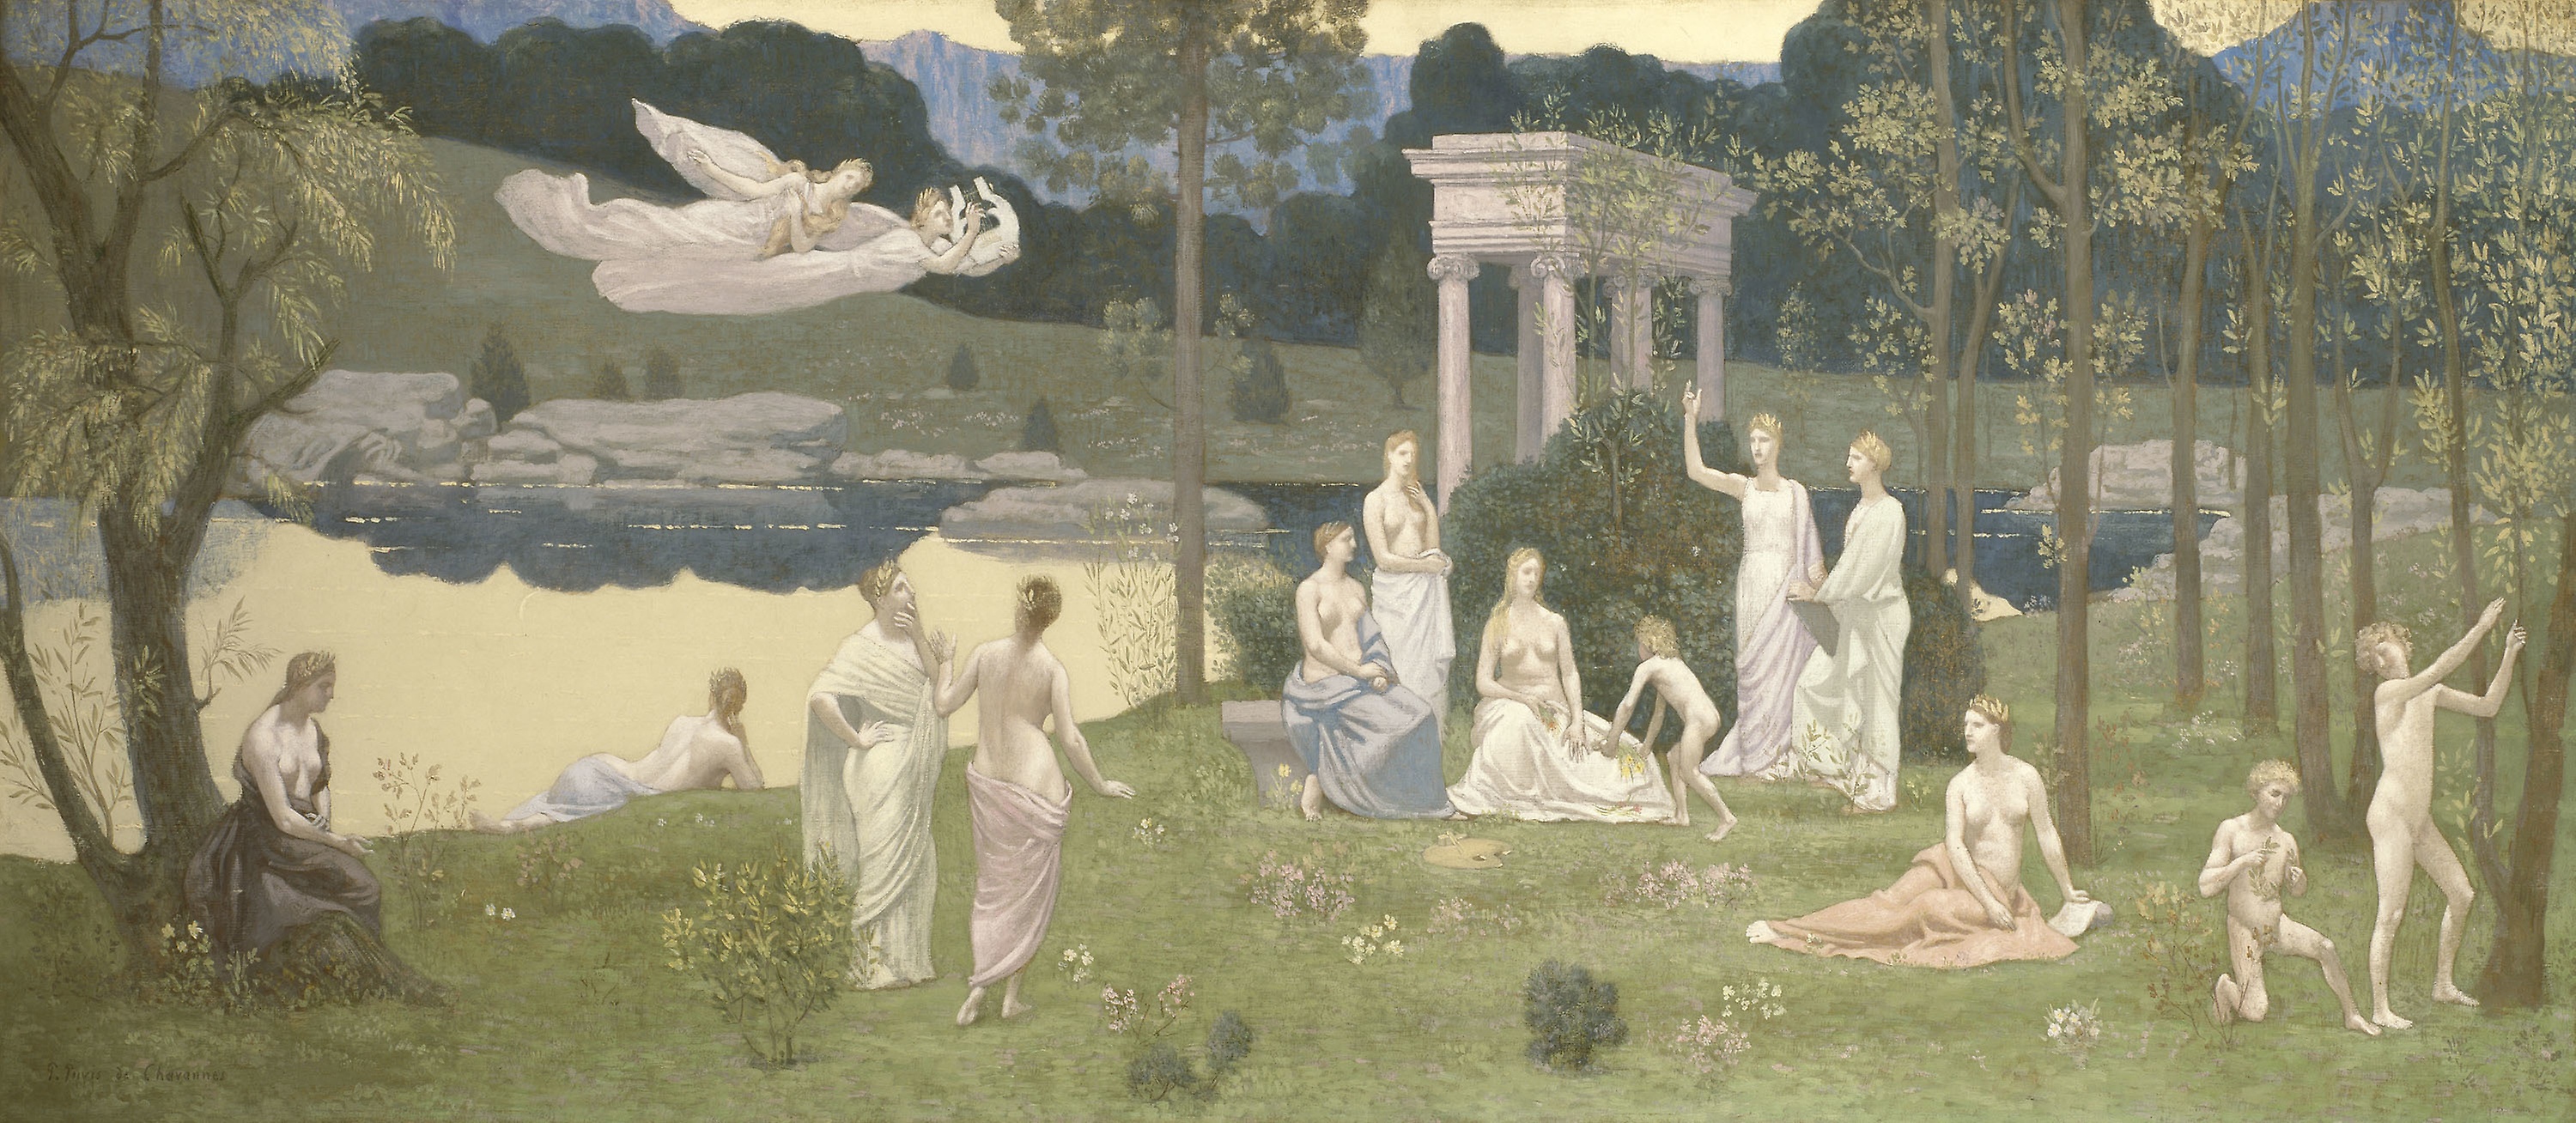 Pierre Puvis de Chavannes - The Sacred Grove, Beloved of the Arts and the Muses - 1922.445 - Art Institute of Chicago.jpg